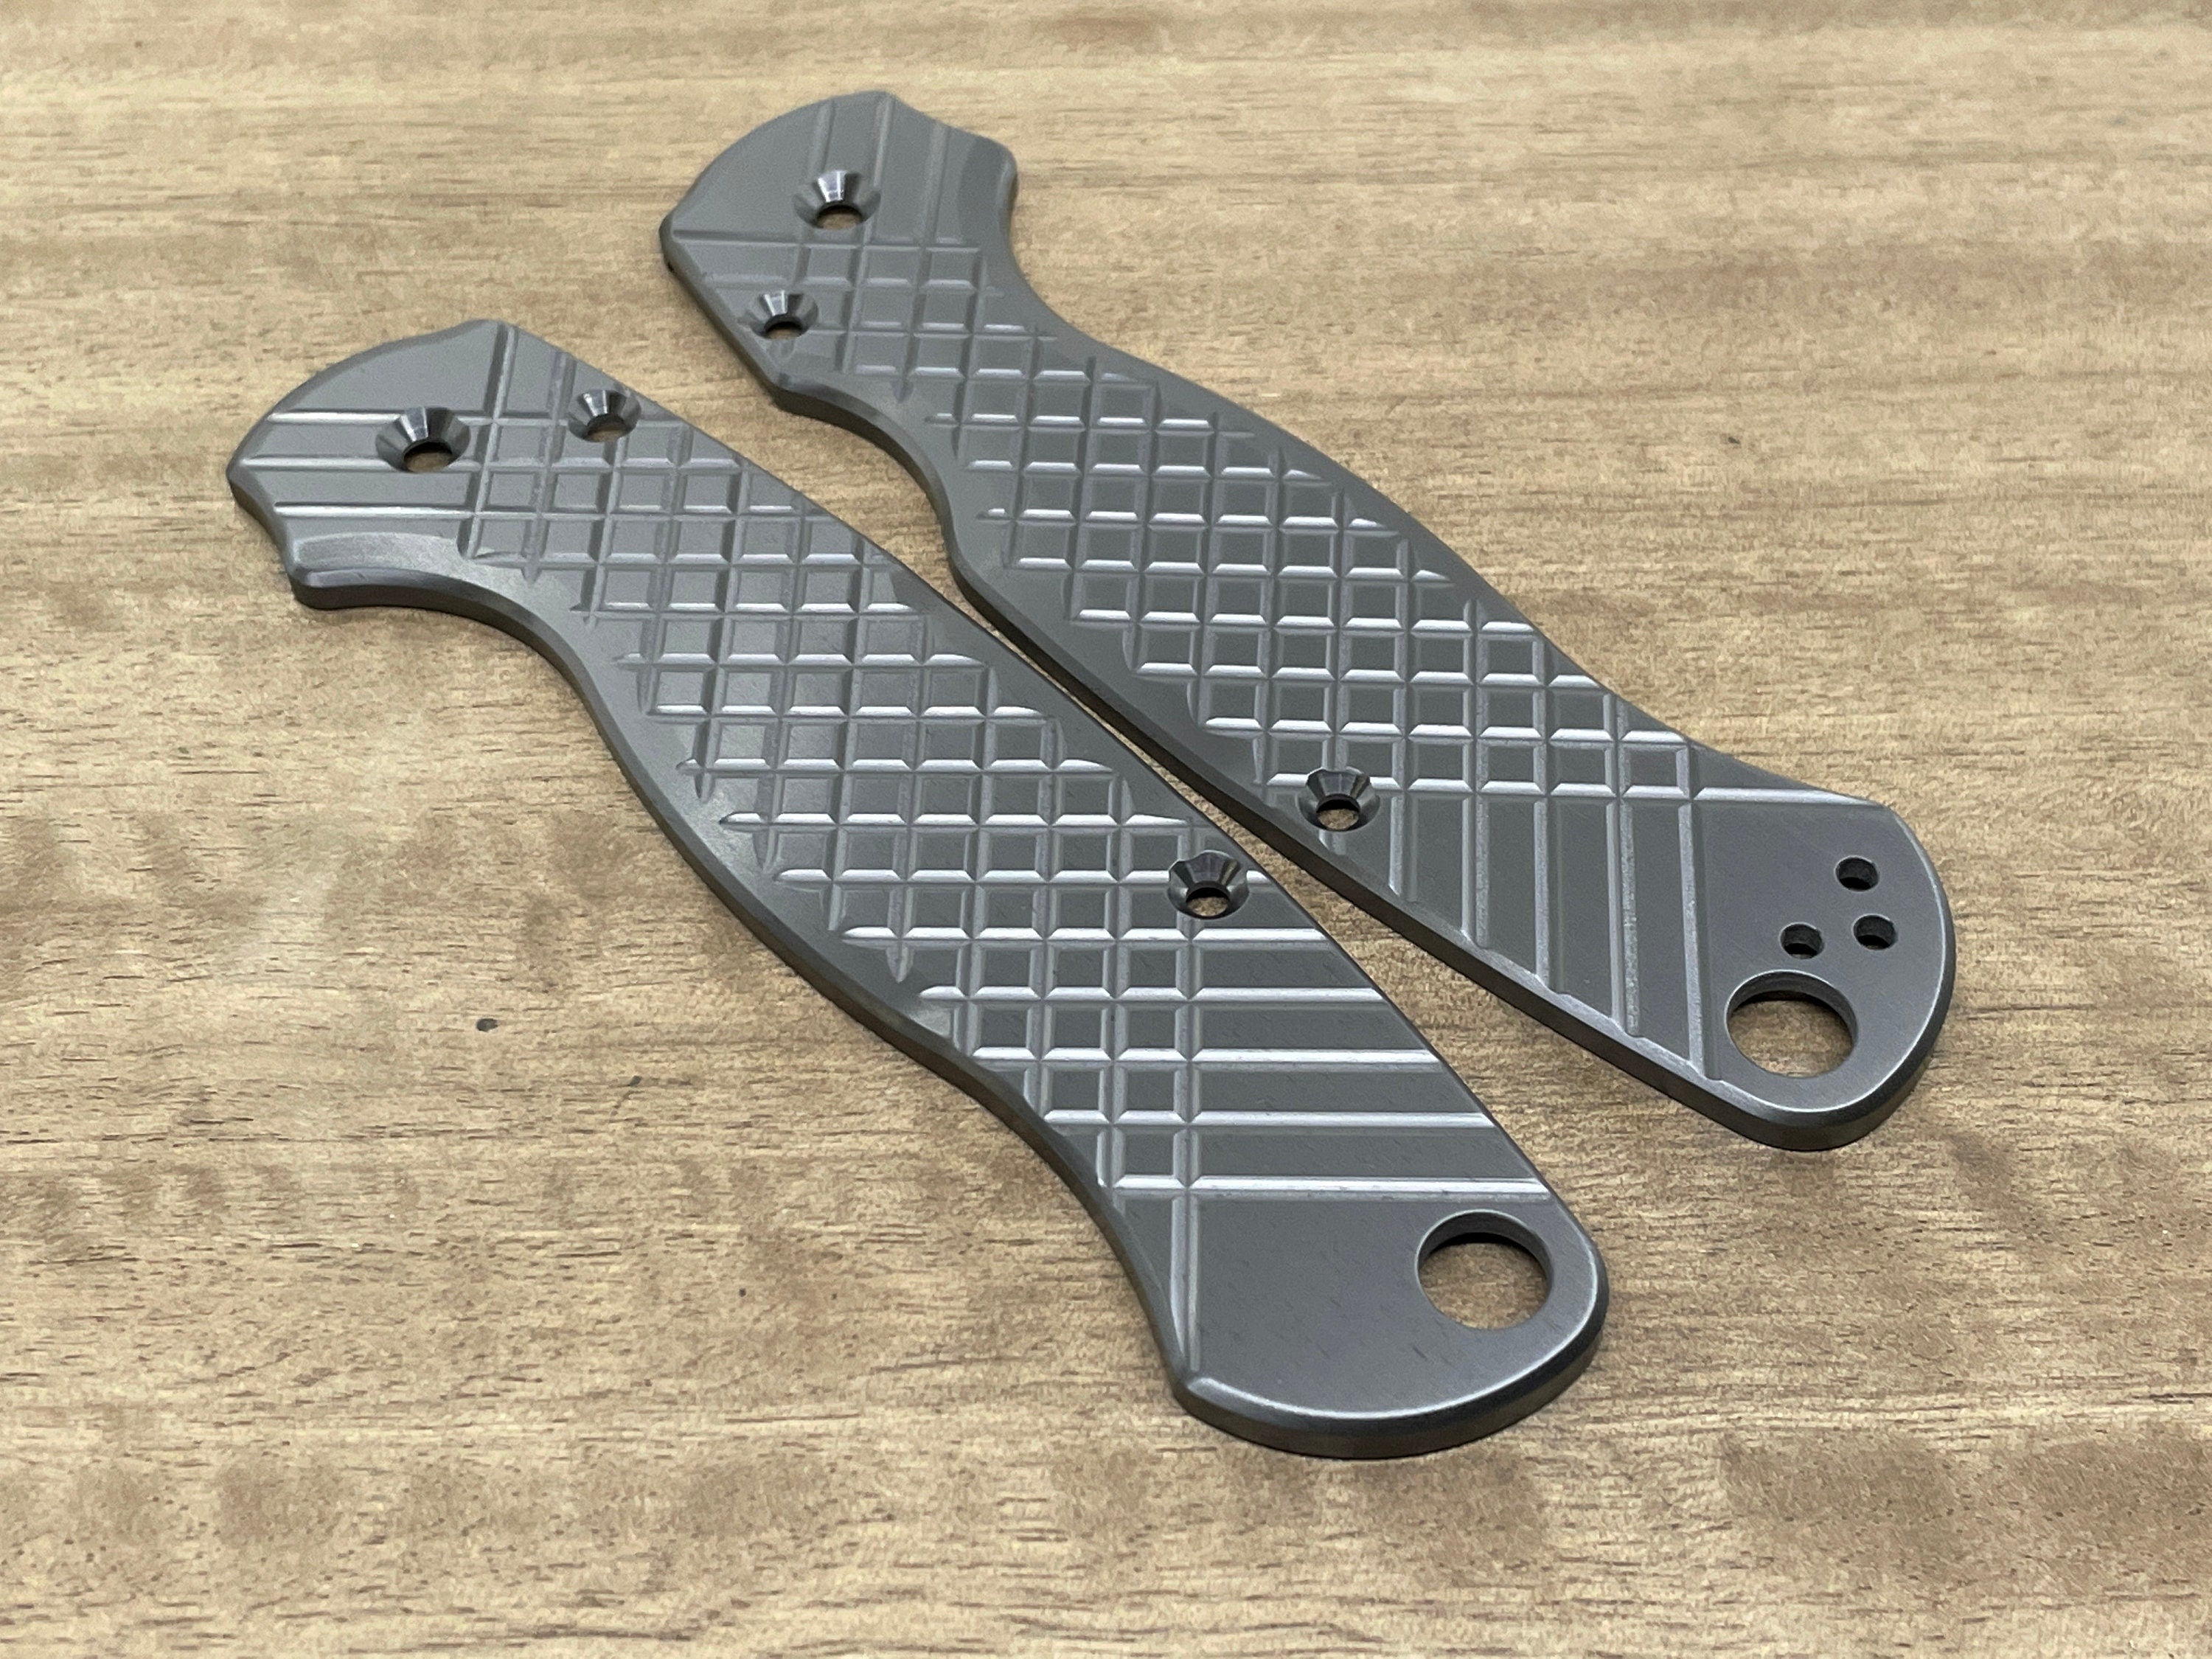 FRAG milled black Zirconium scales for Spyderco Paramilitary 2 PM2